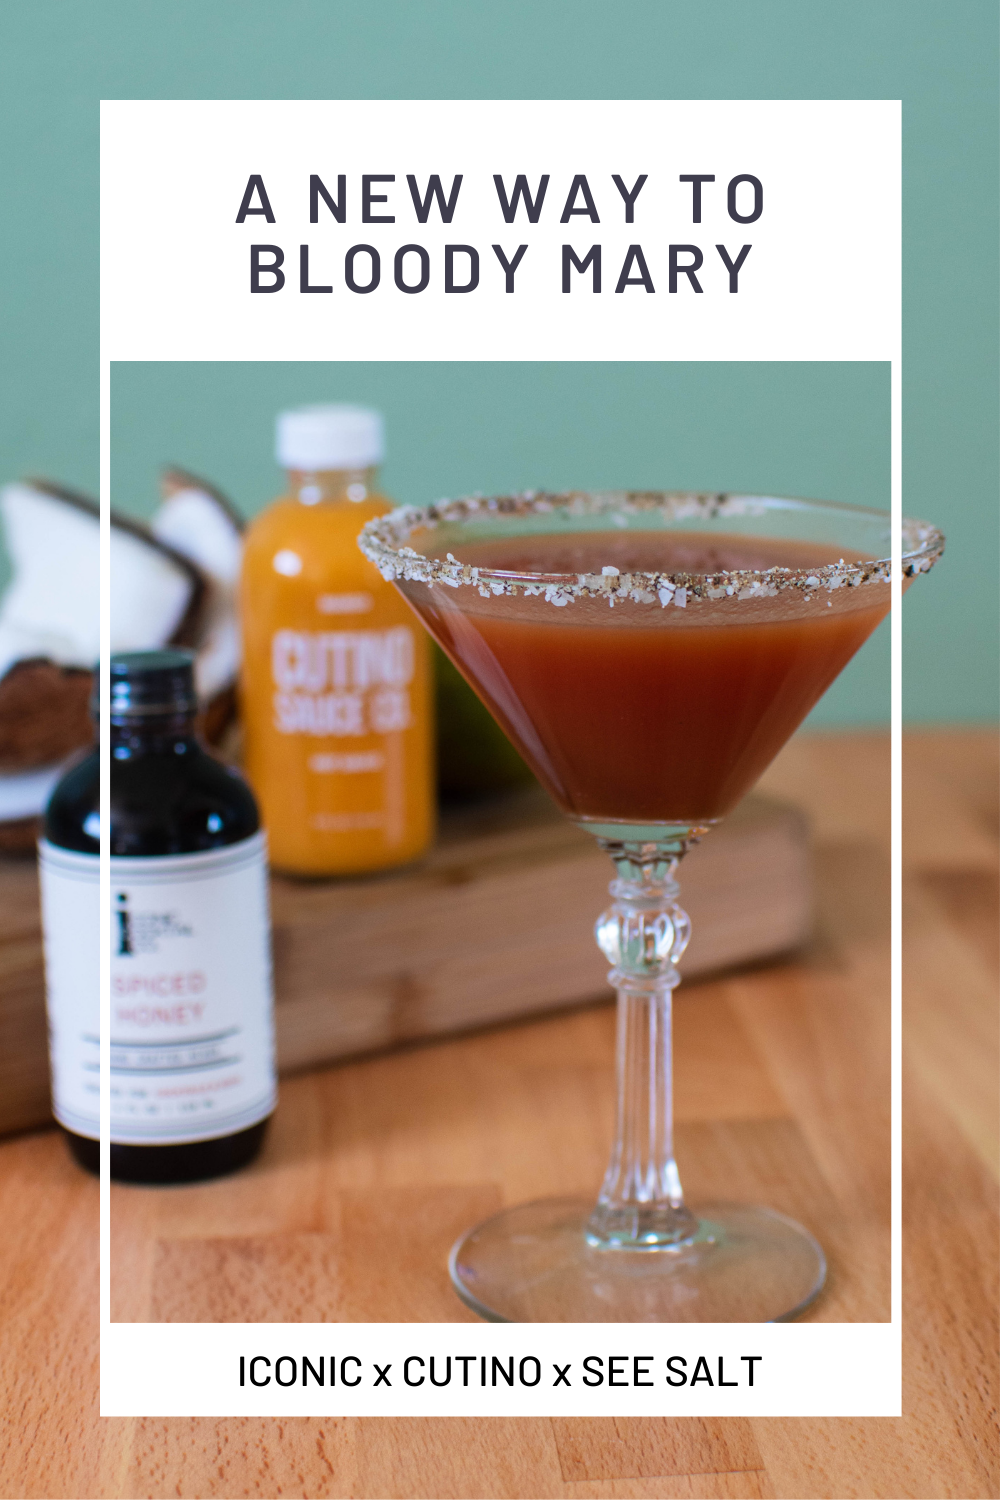 A New Way to Bloody Mary